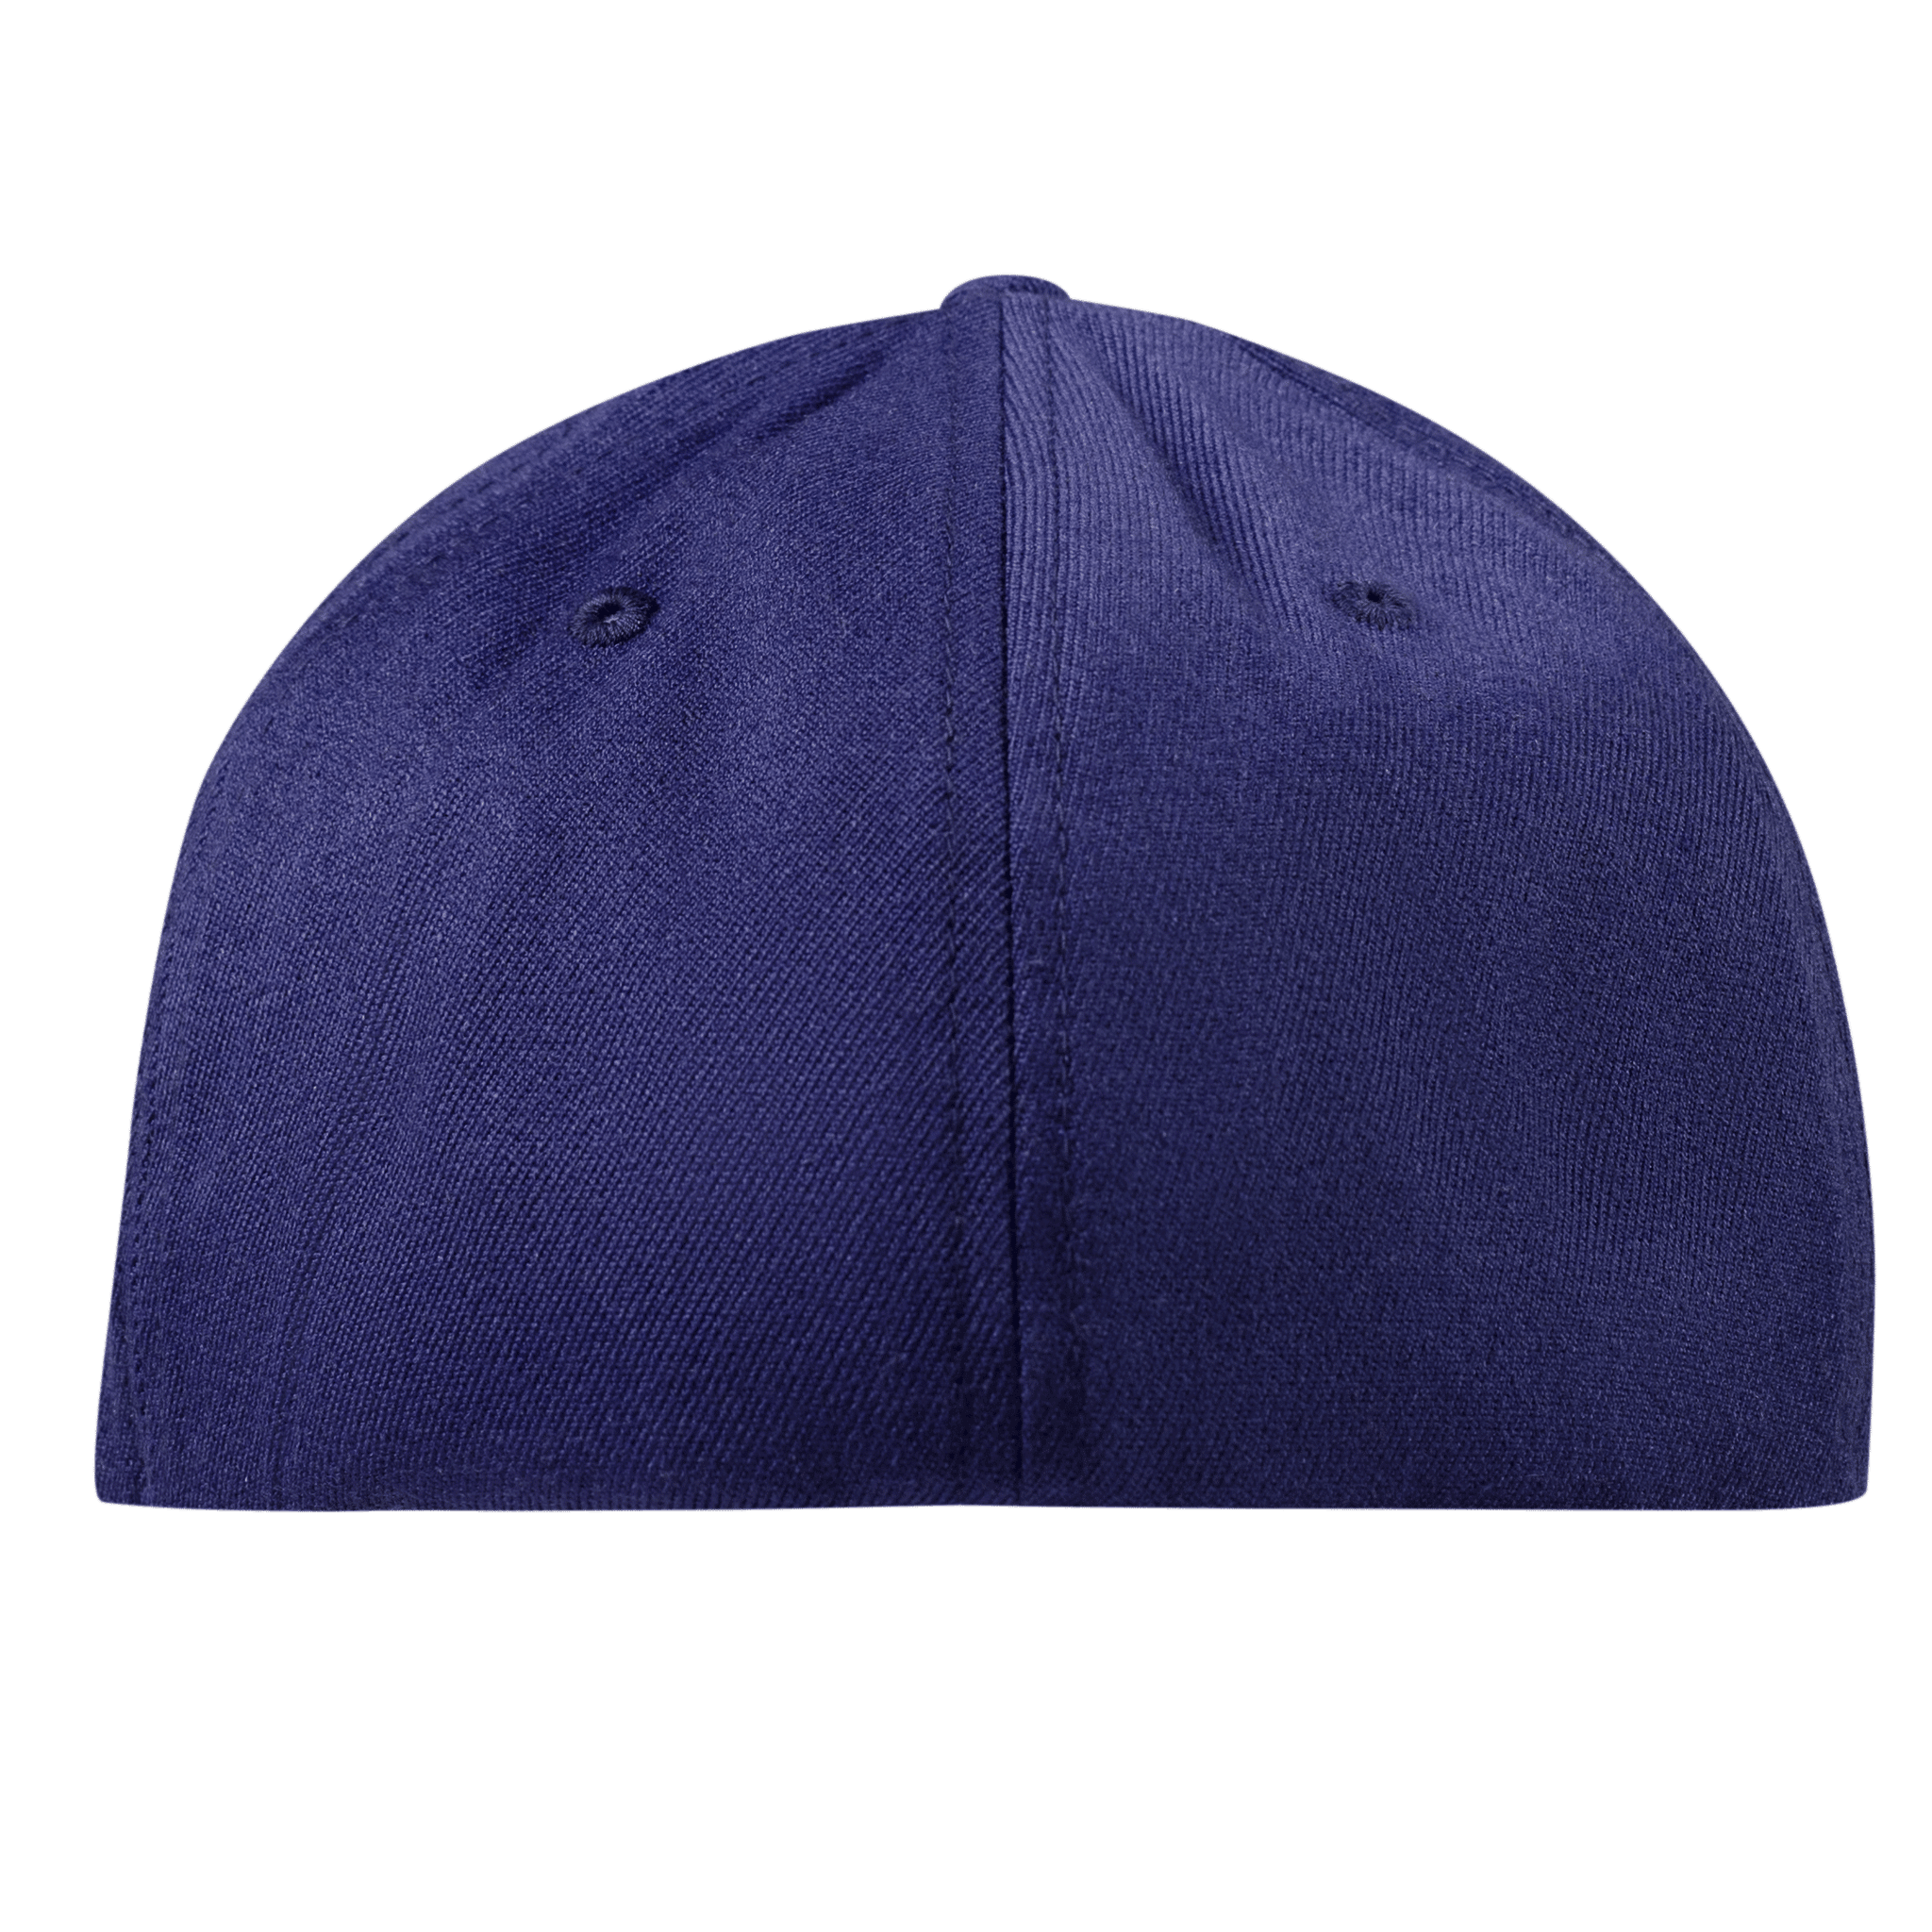 Ohio 17 Flexfit Fitted Back Navy